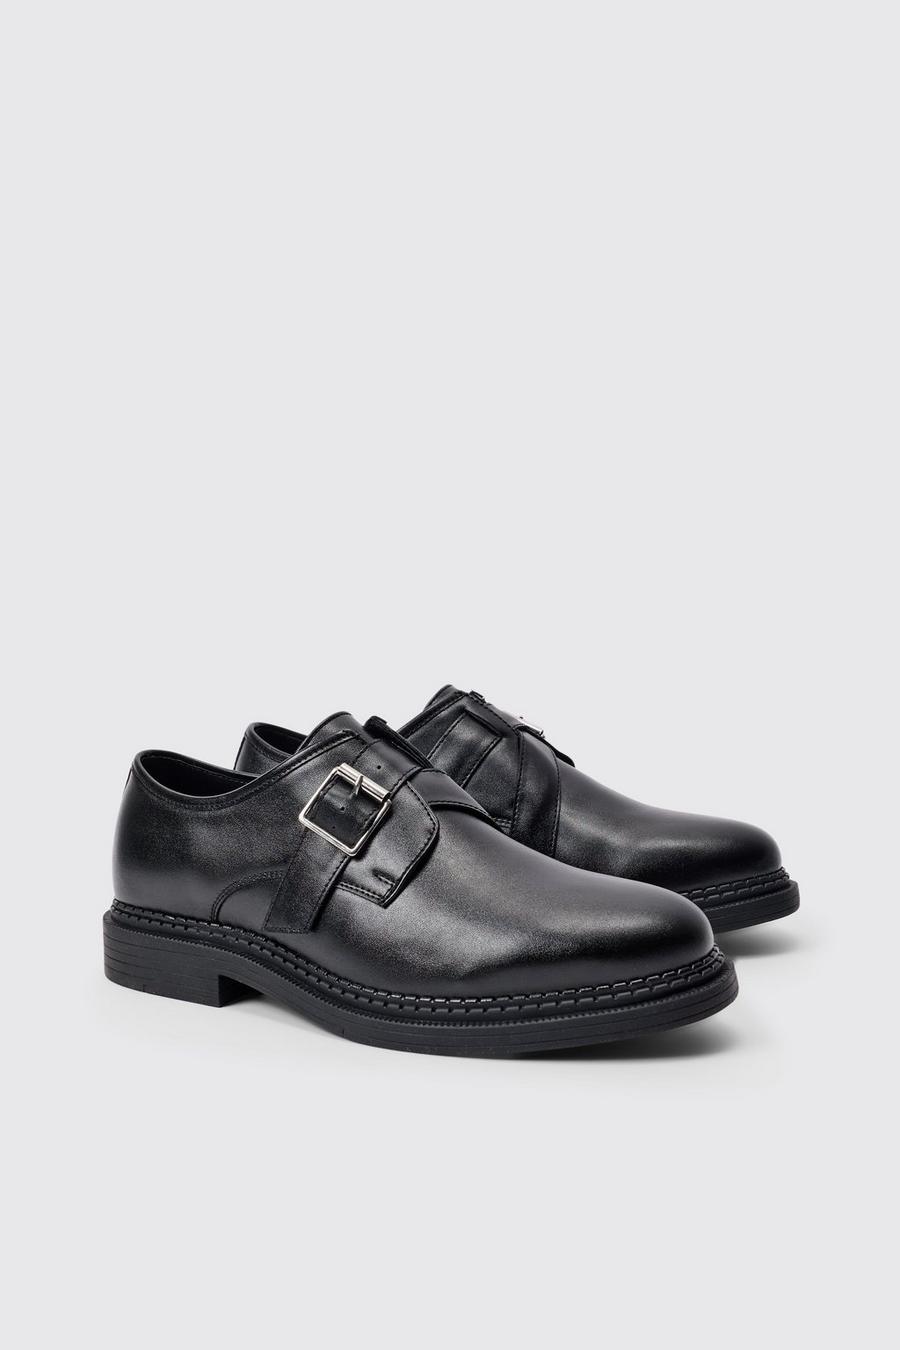 Pu Cross Over Strap Detail Loafer In Black